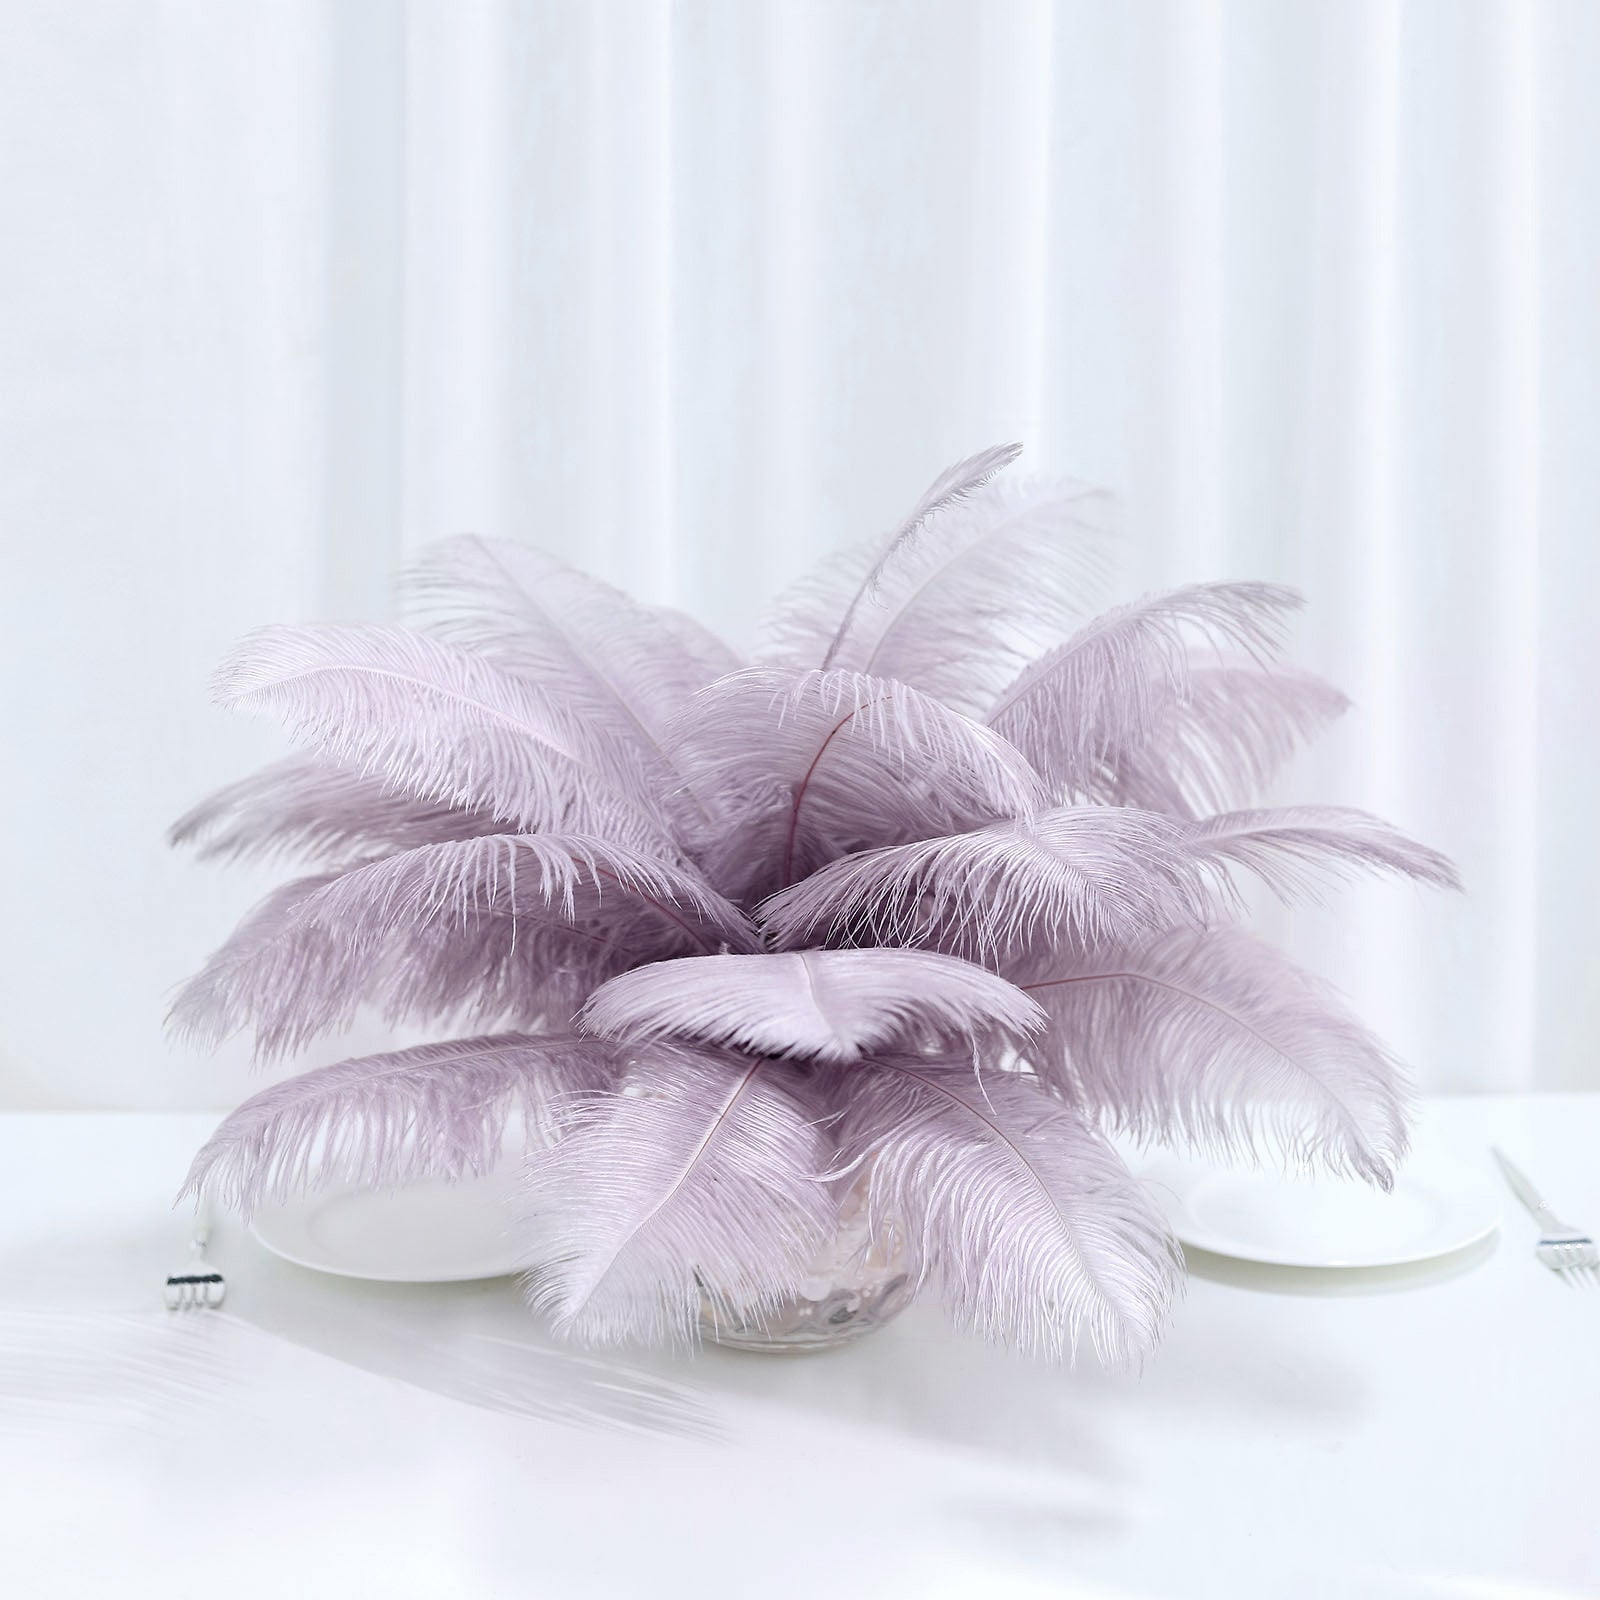 White Ostrich Feathers for centerpieces 12-15 (50 pcs.)